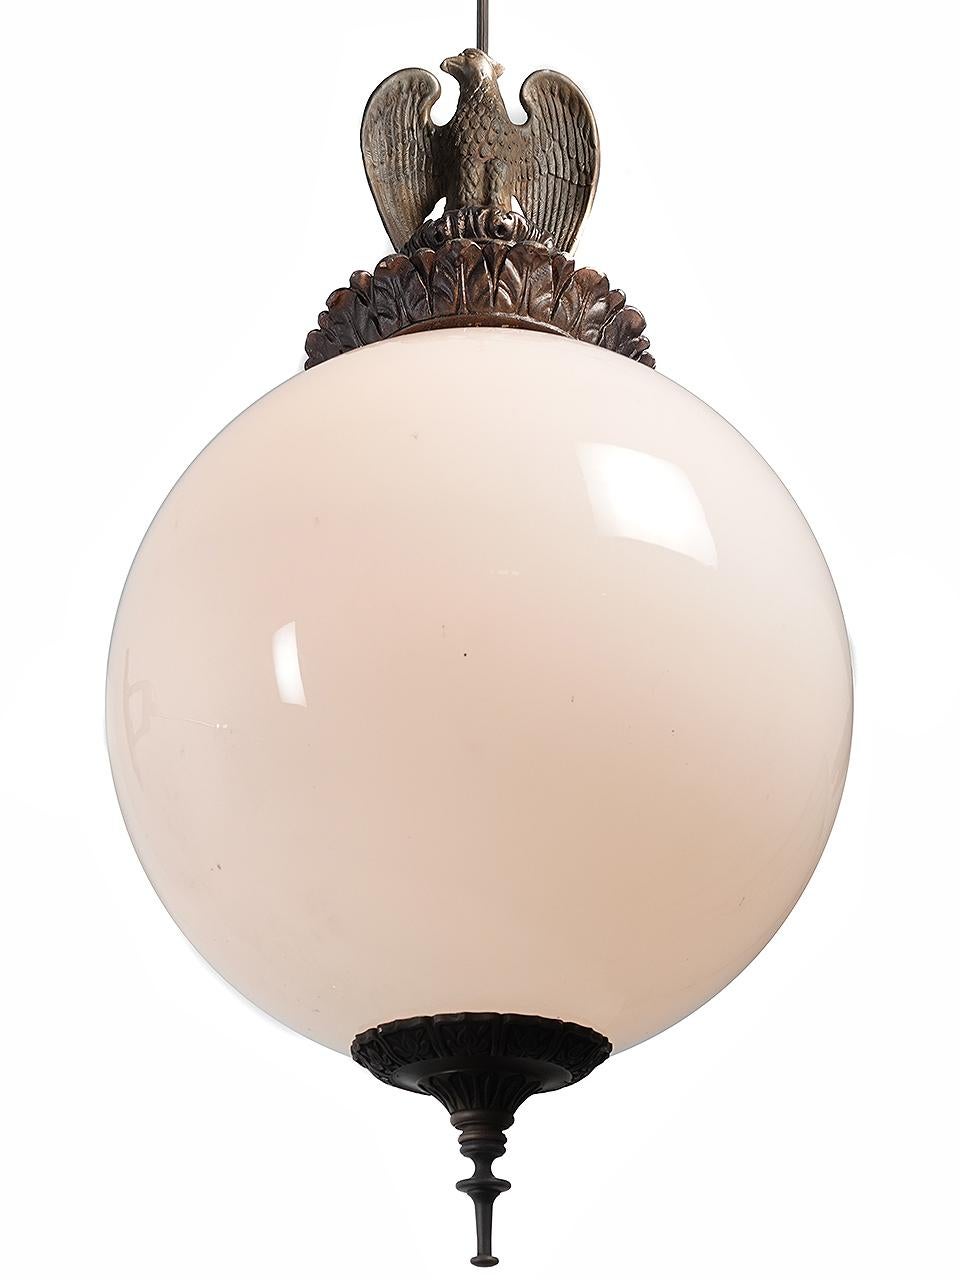 Federal Large Courthouse Eagle Globe Lamp For Sale